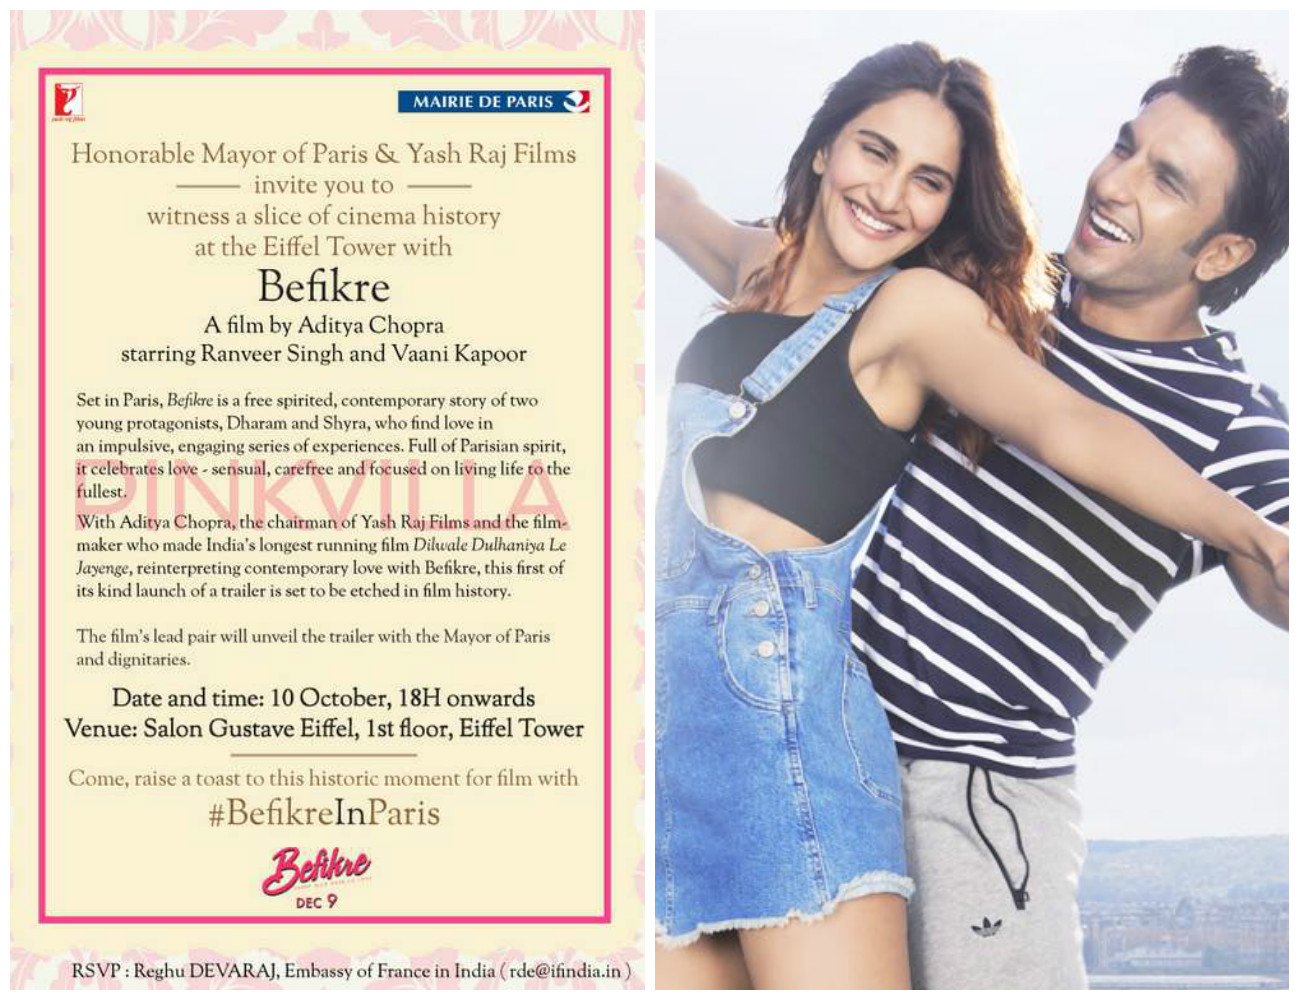 EXCLUSIVE! Dharam Ranveer and Shyra Vaani's invitation for Befikre's Paris trailer launch is innovative!